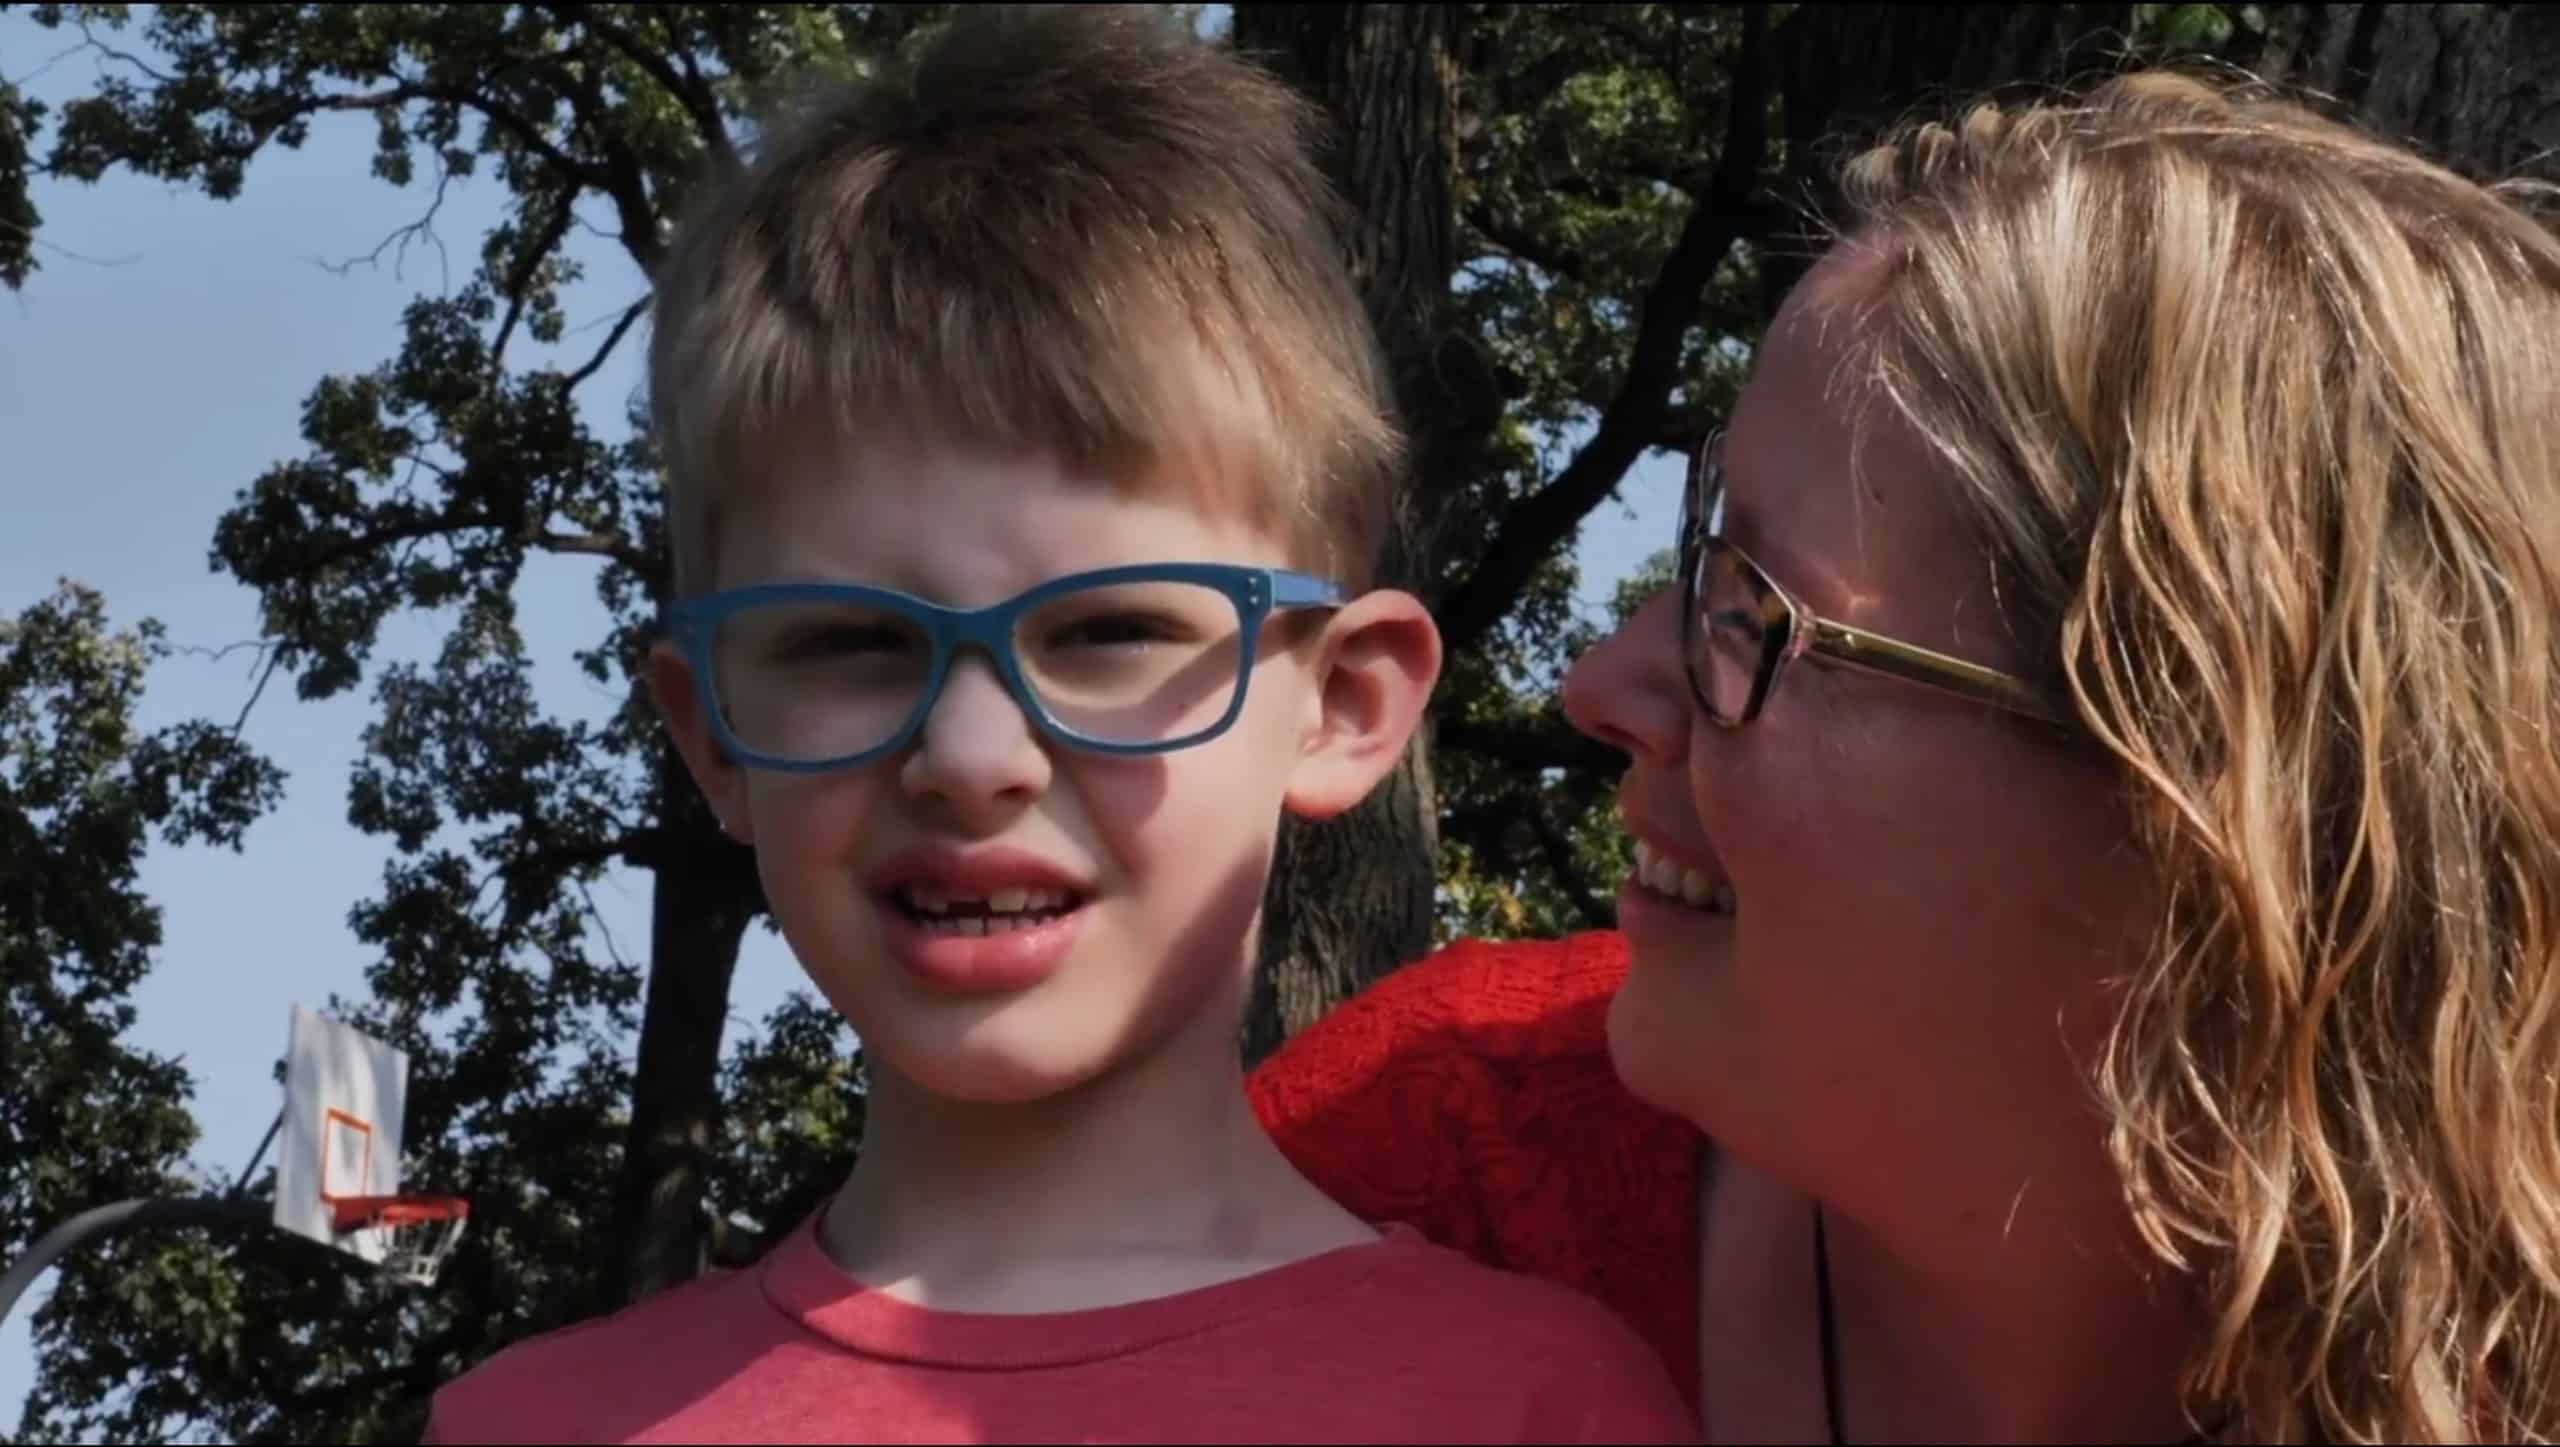 Autism and Auditory Processing: Eyeglasses That Listen